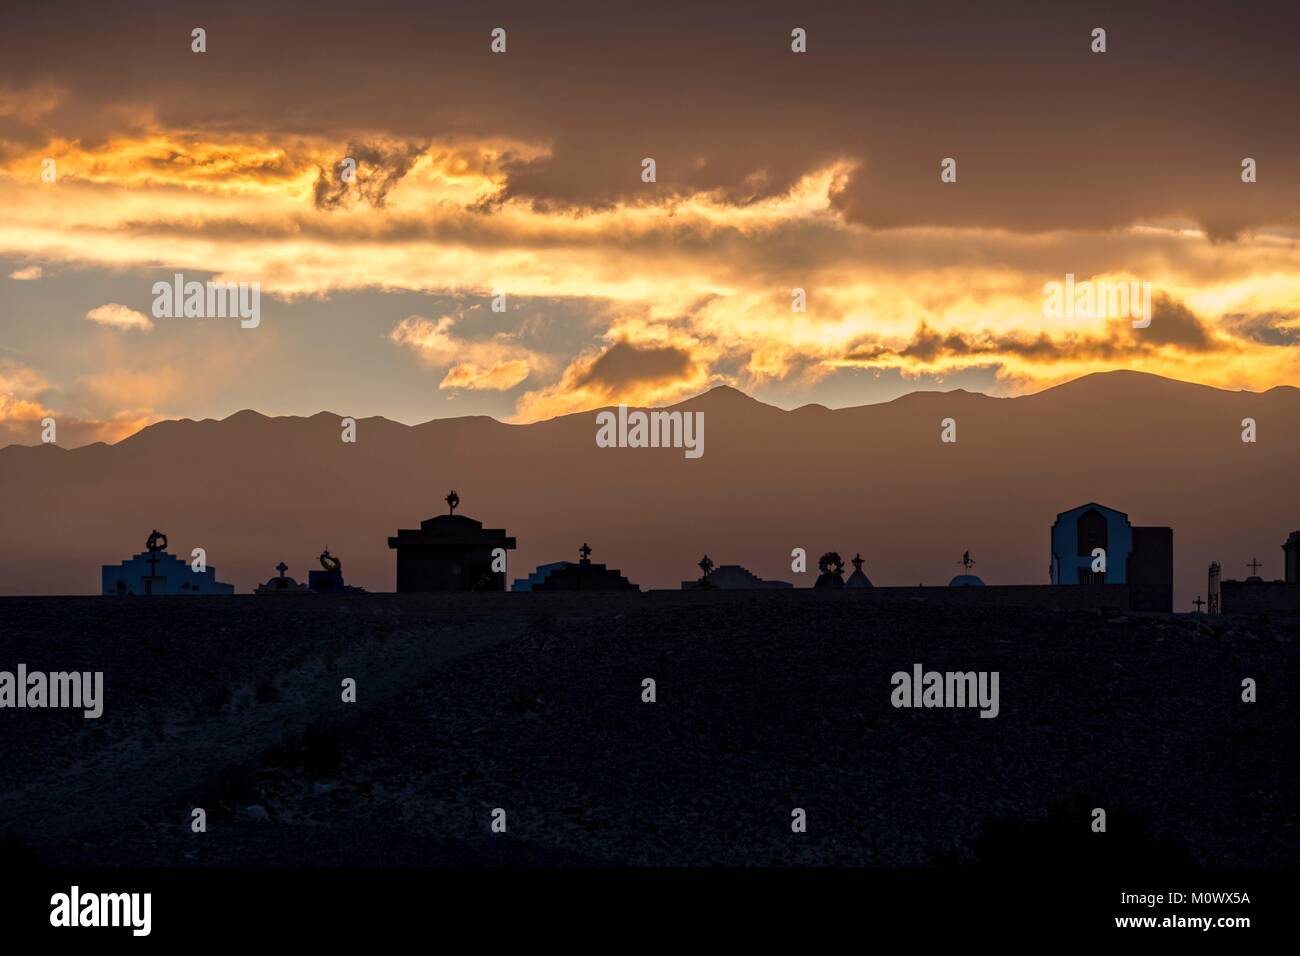 Argentine,Catamarca province,Fiambala,cemetery of Saujil,sunset over the Cordillere,Andes mountains Stock Photo